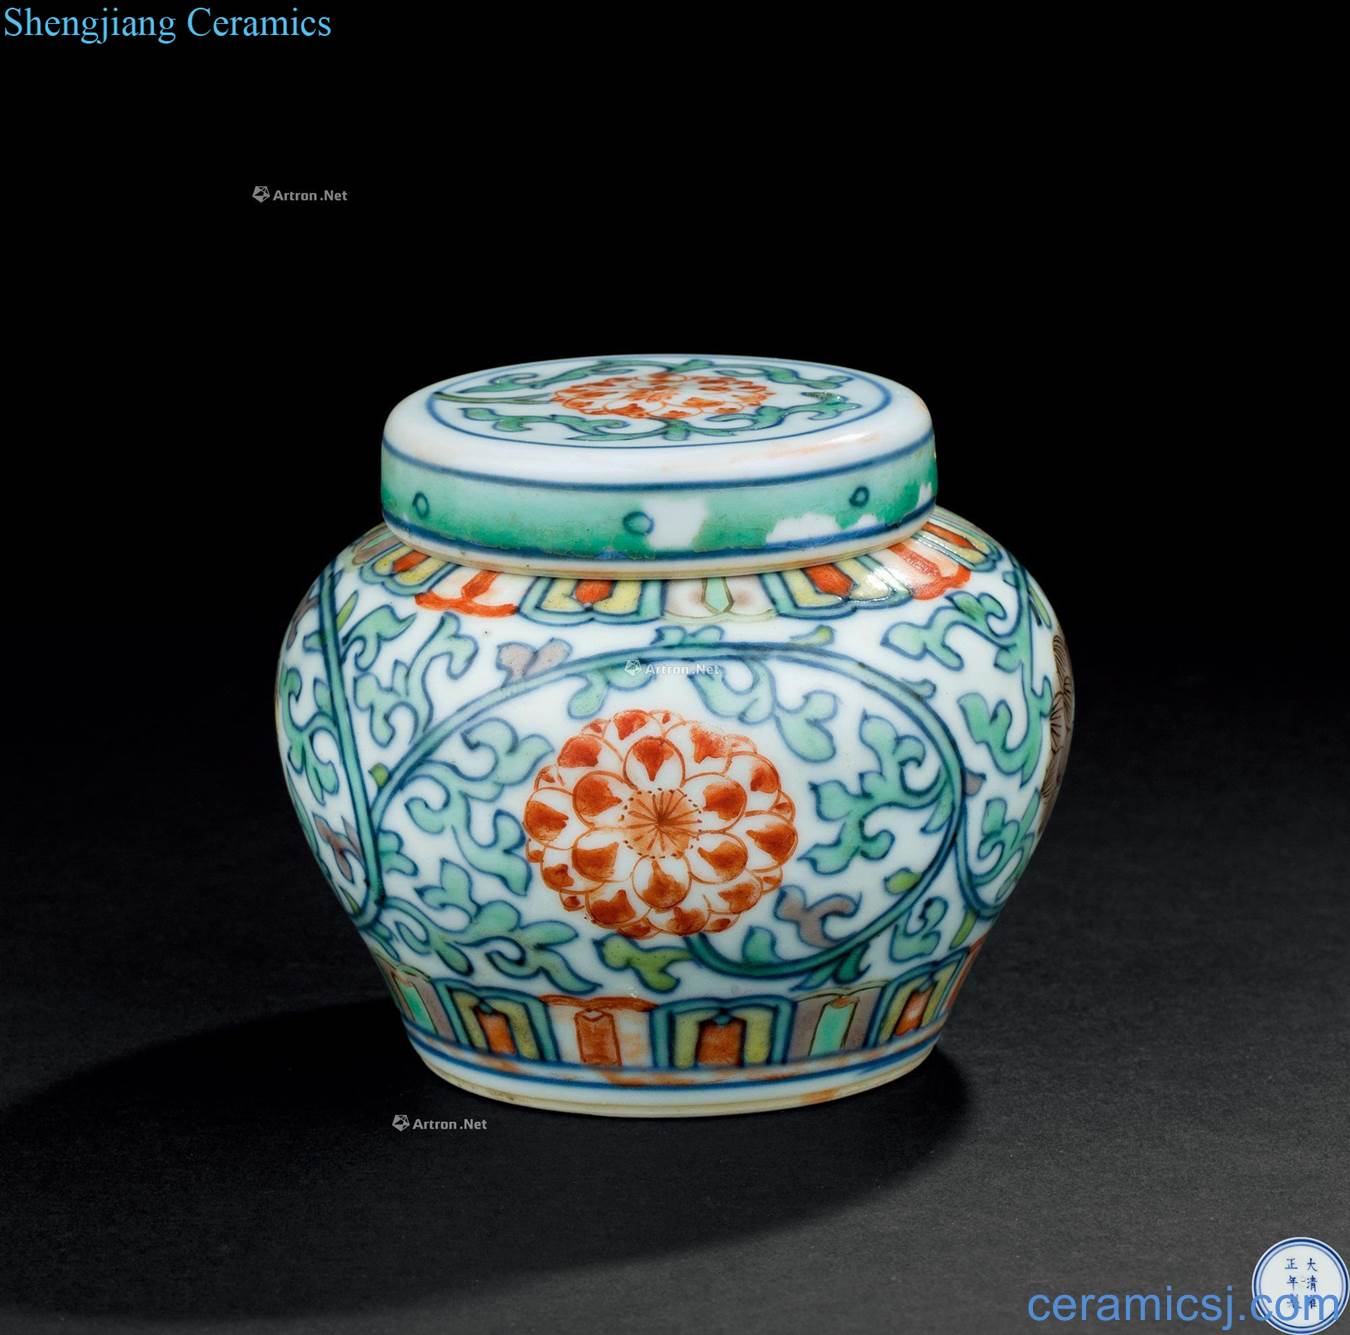 In the qing dynasty (1644-1911) bucket cover tank